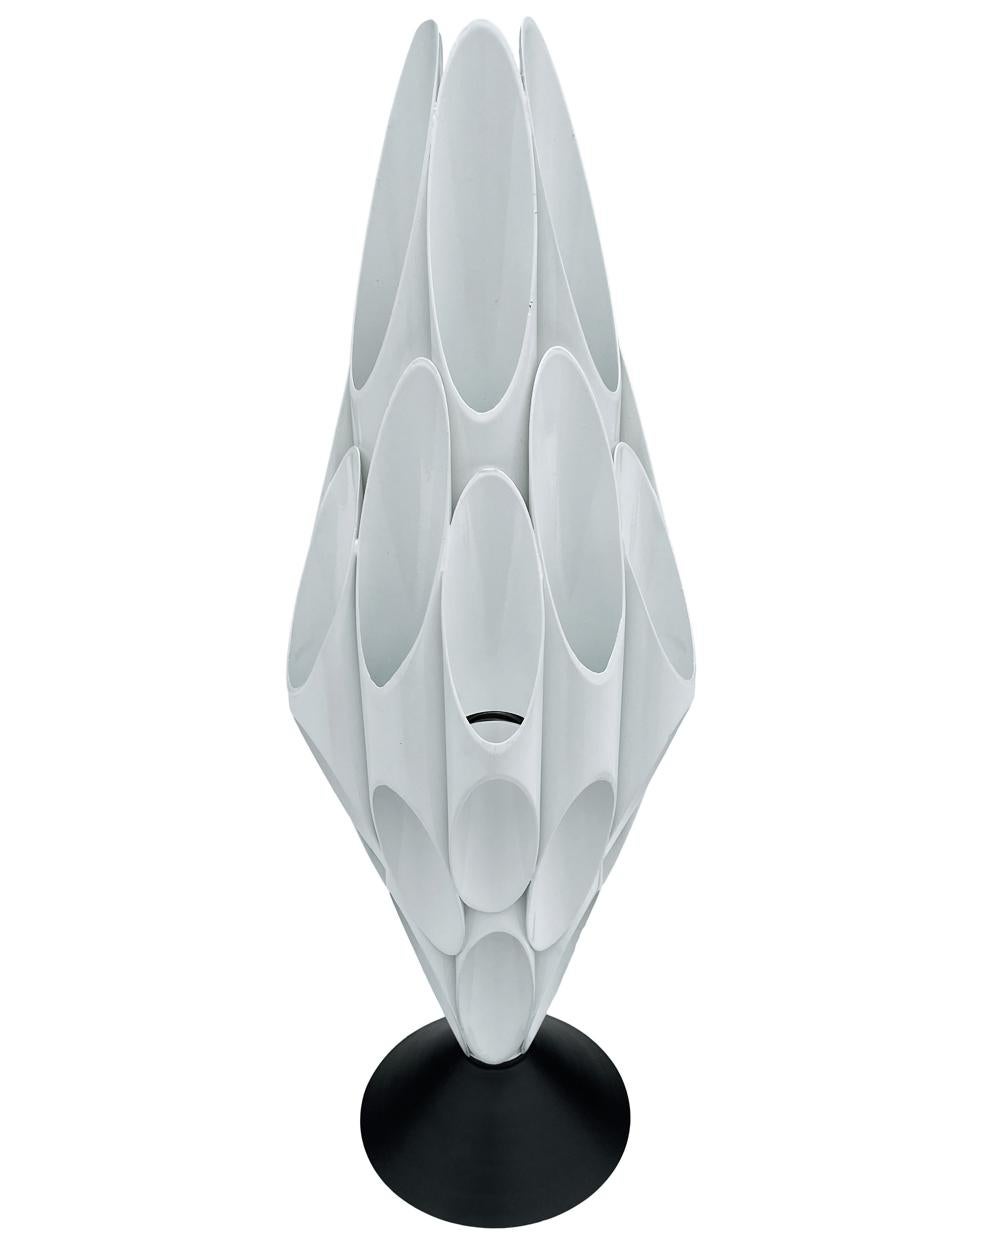 A sculptural table lamp made by Designline. It features all metal construction with bright white powder coated tubes and black base. It takes one standard bulb up to 100 watts. It has a very long cord with the on / off switch.